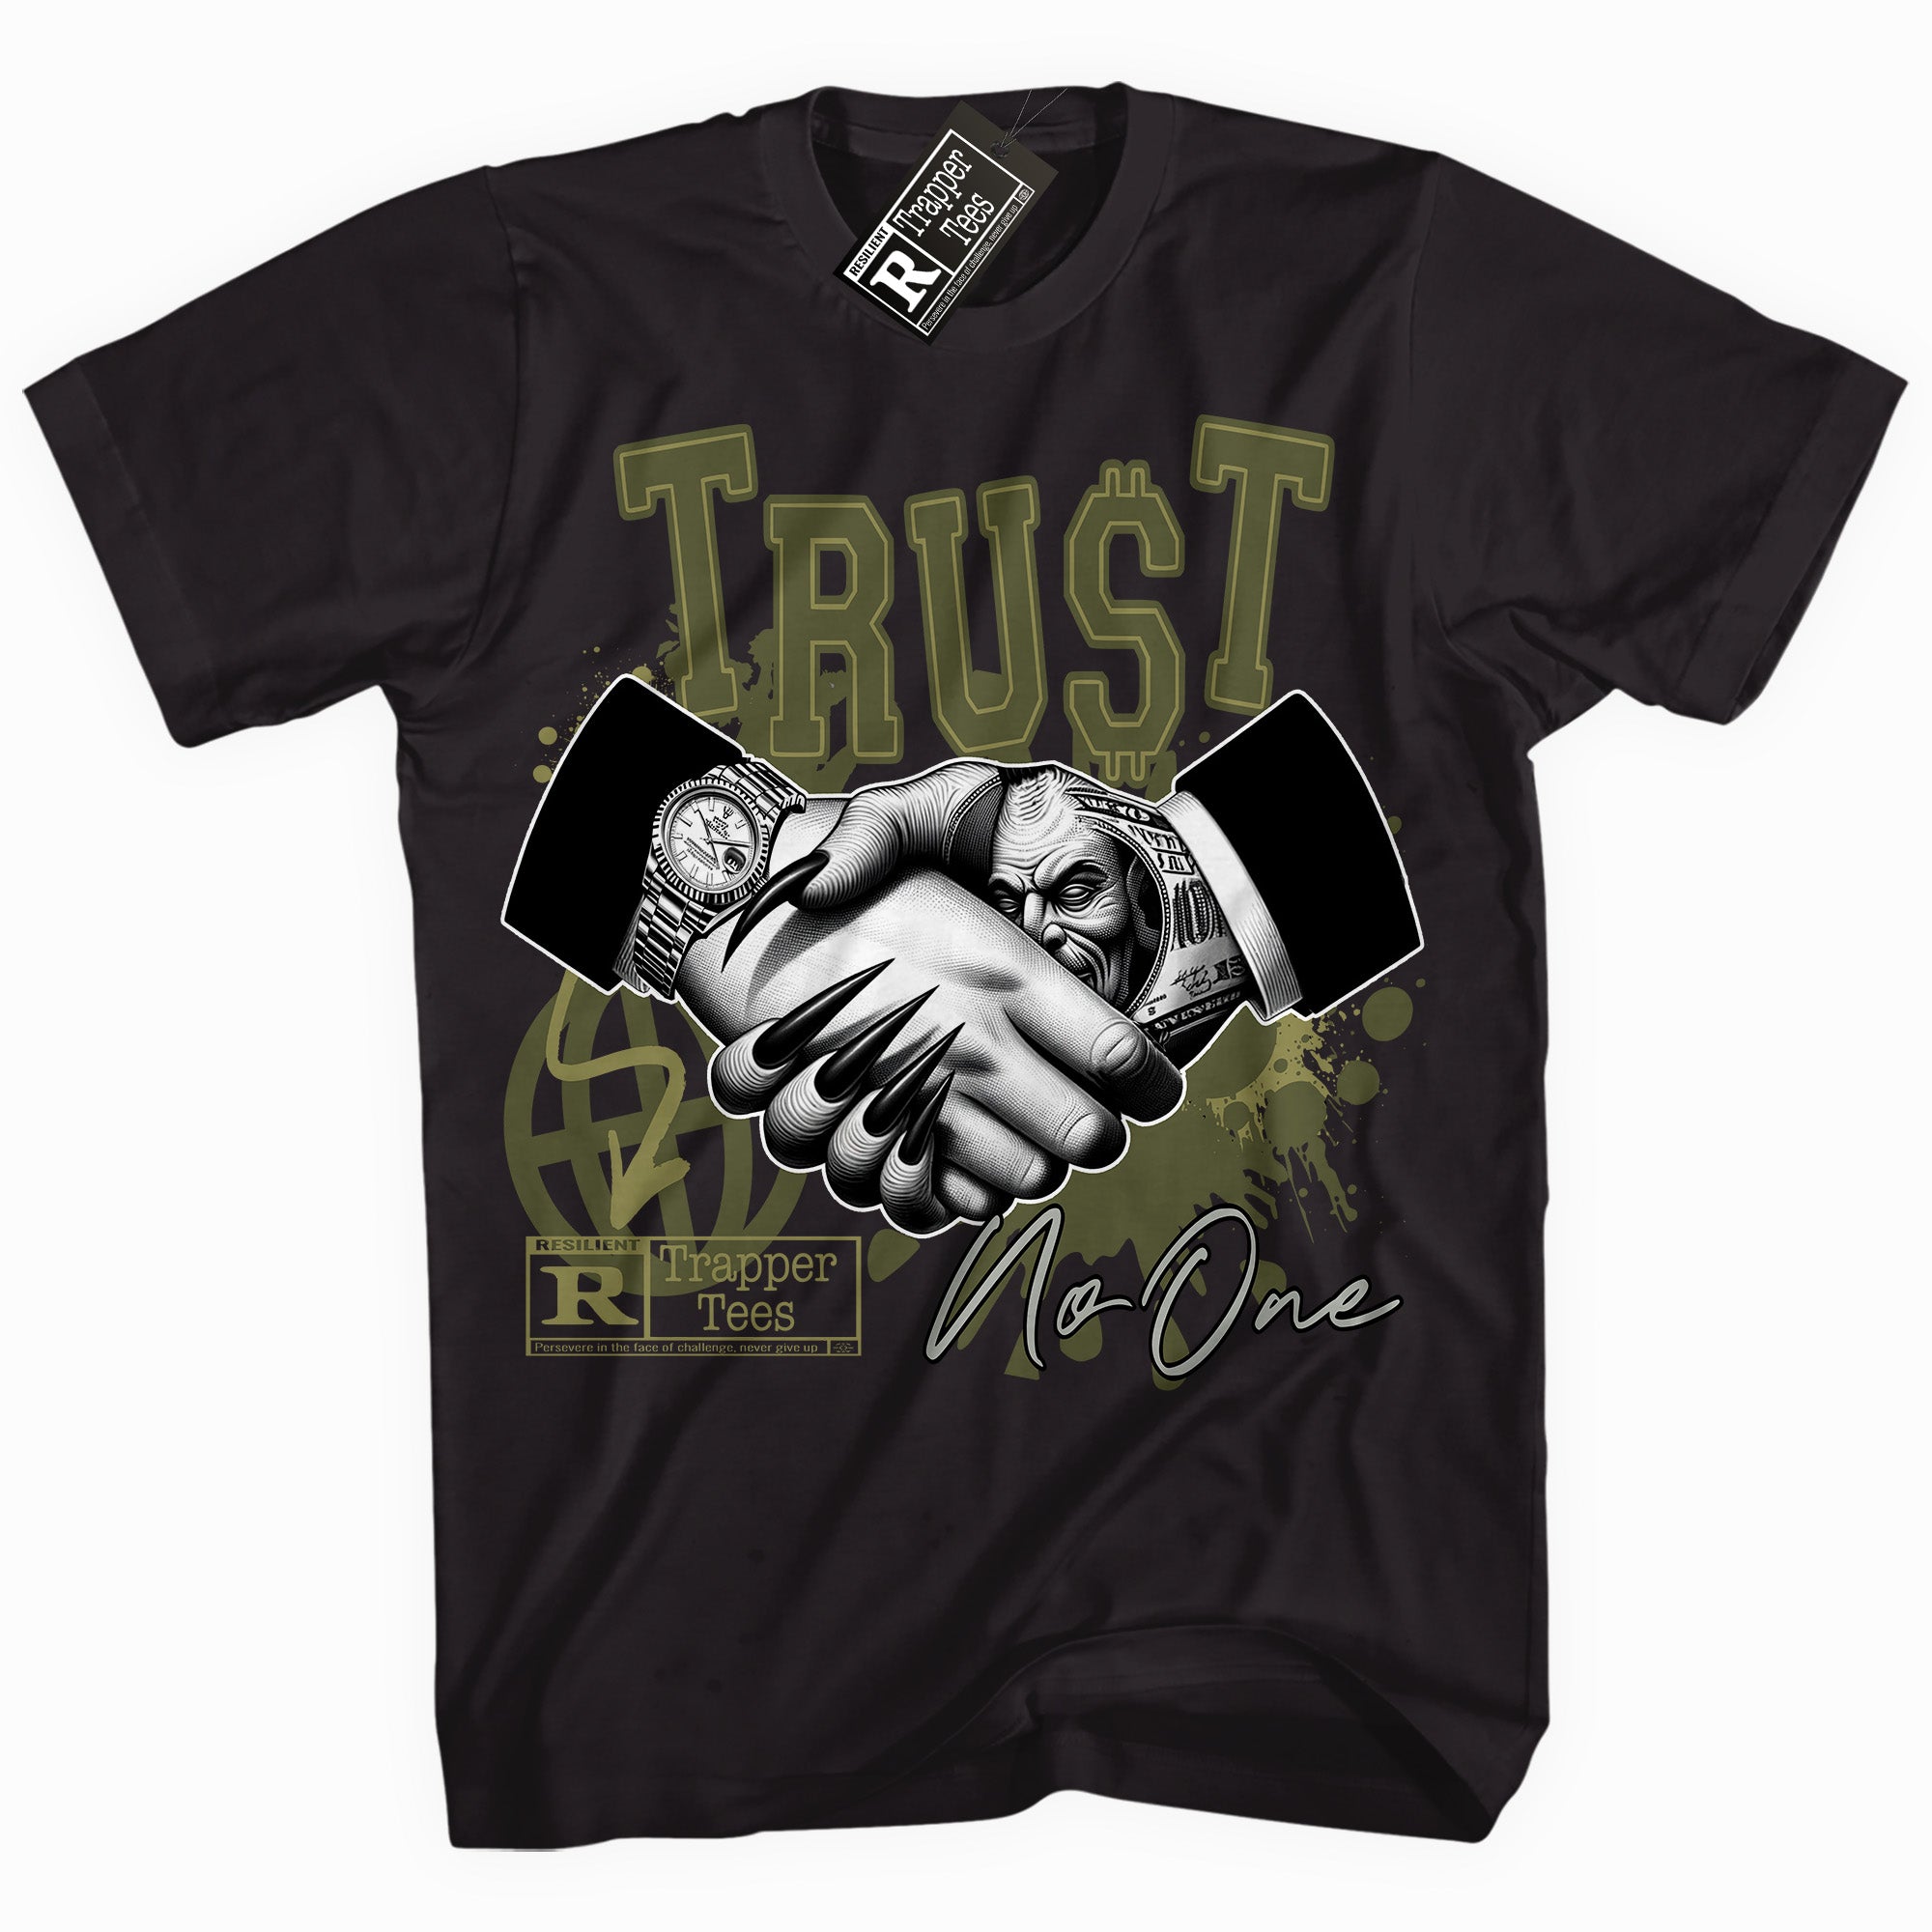 Cool Black graphic tee with “ Trust ” print, that perfectly matches Craft Olive 4s sneakers